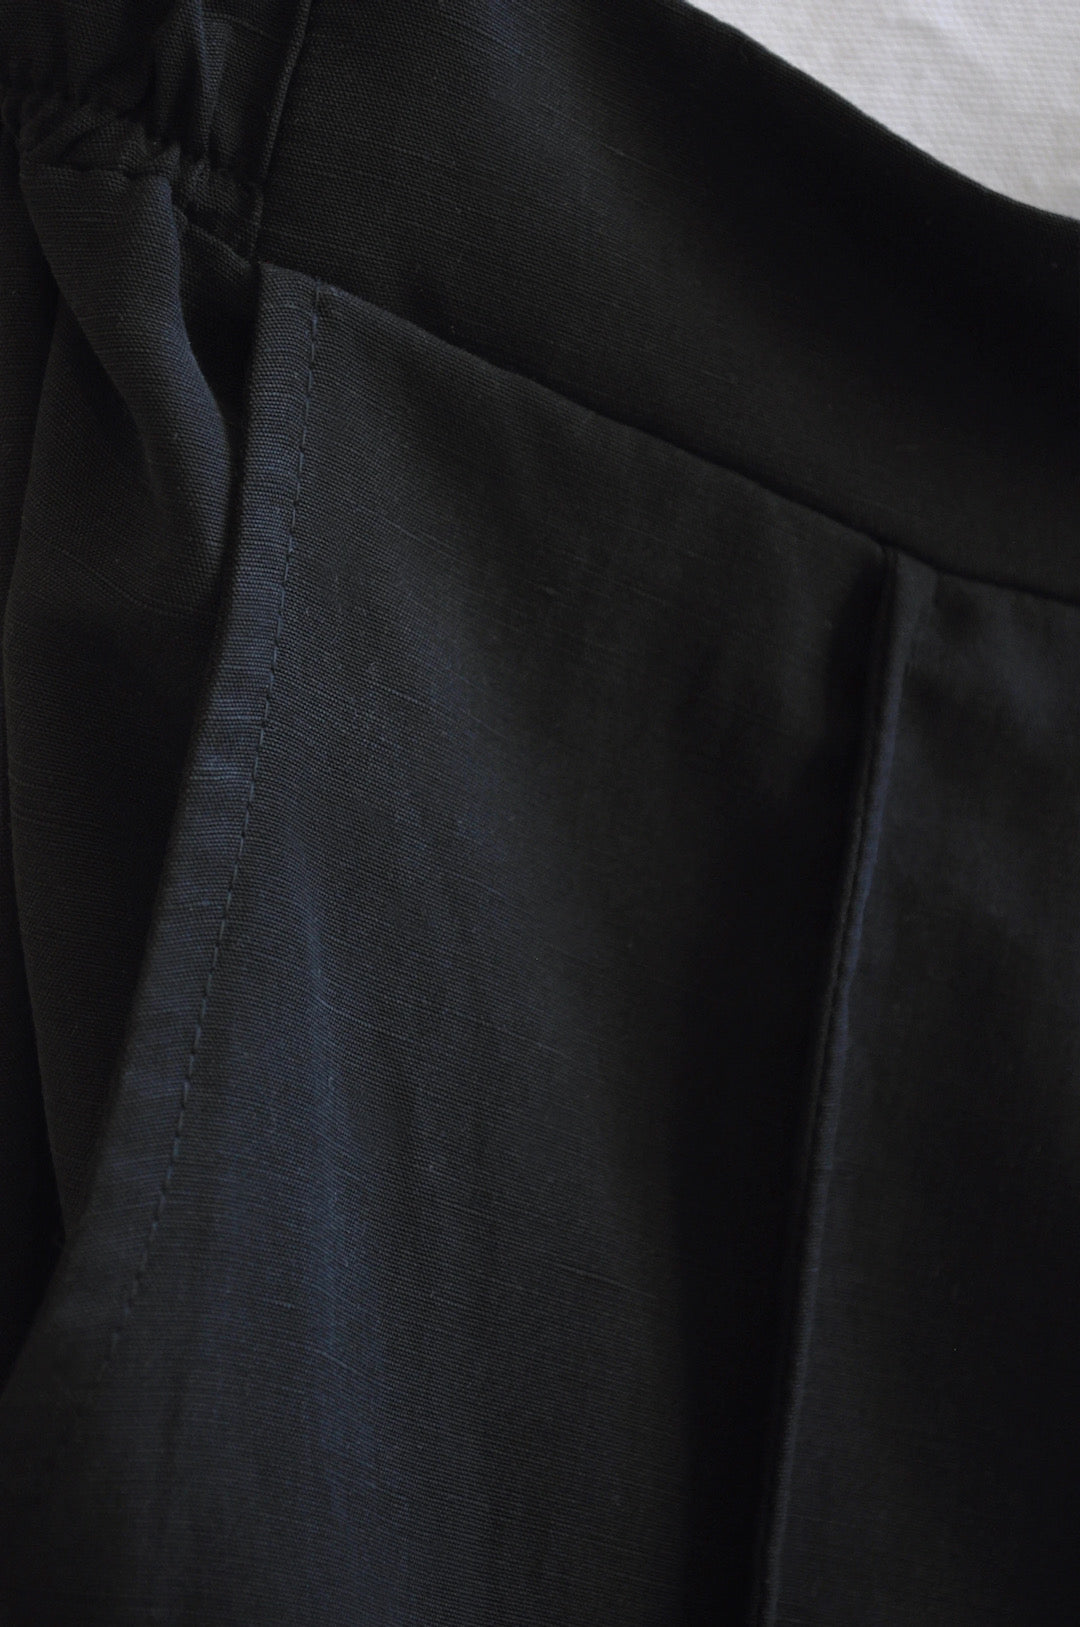 A close up of an OVNA OVICH Eleanor Pant - Onyx with a button.